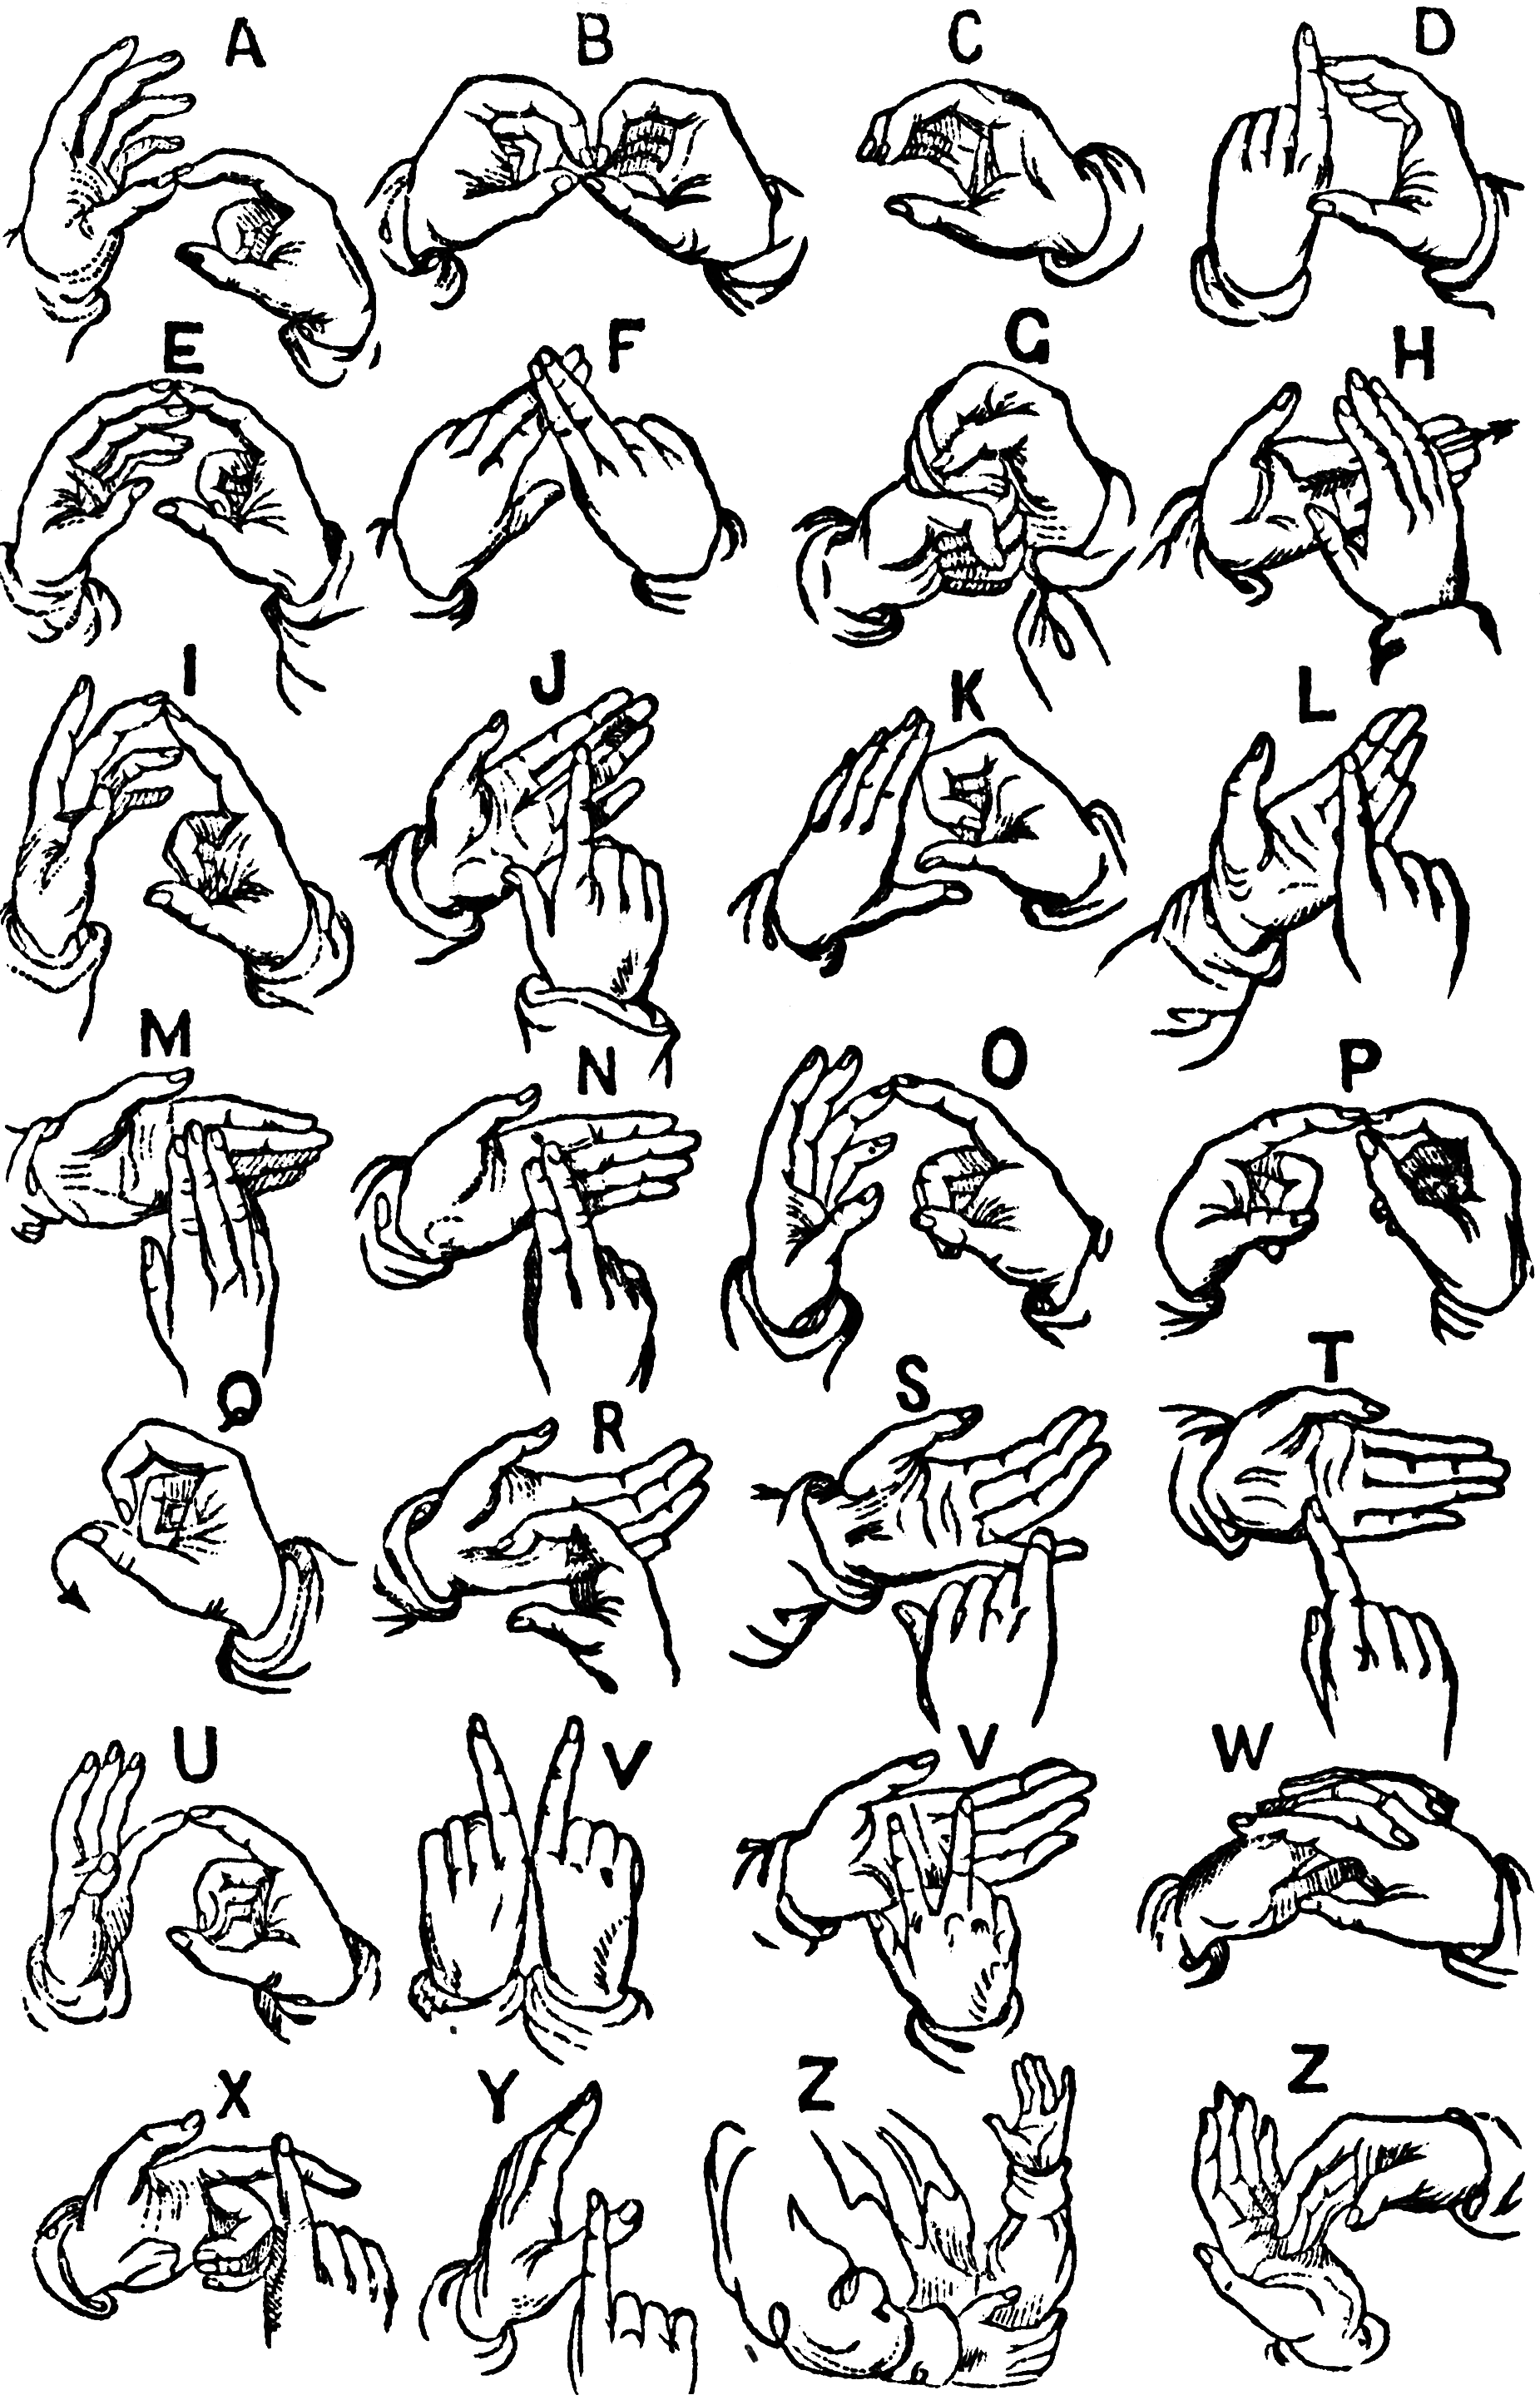 Two-handed Alphabet | ClipArt ETC